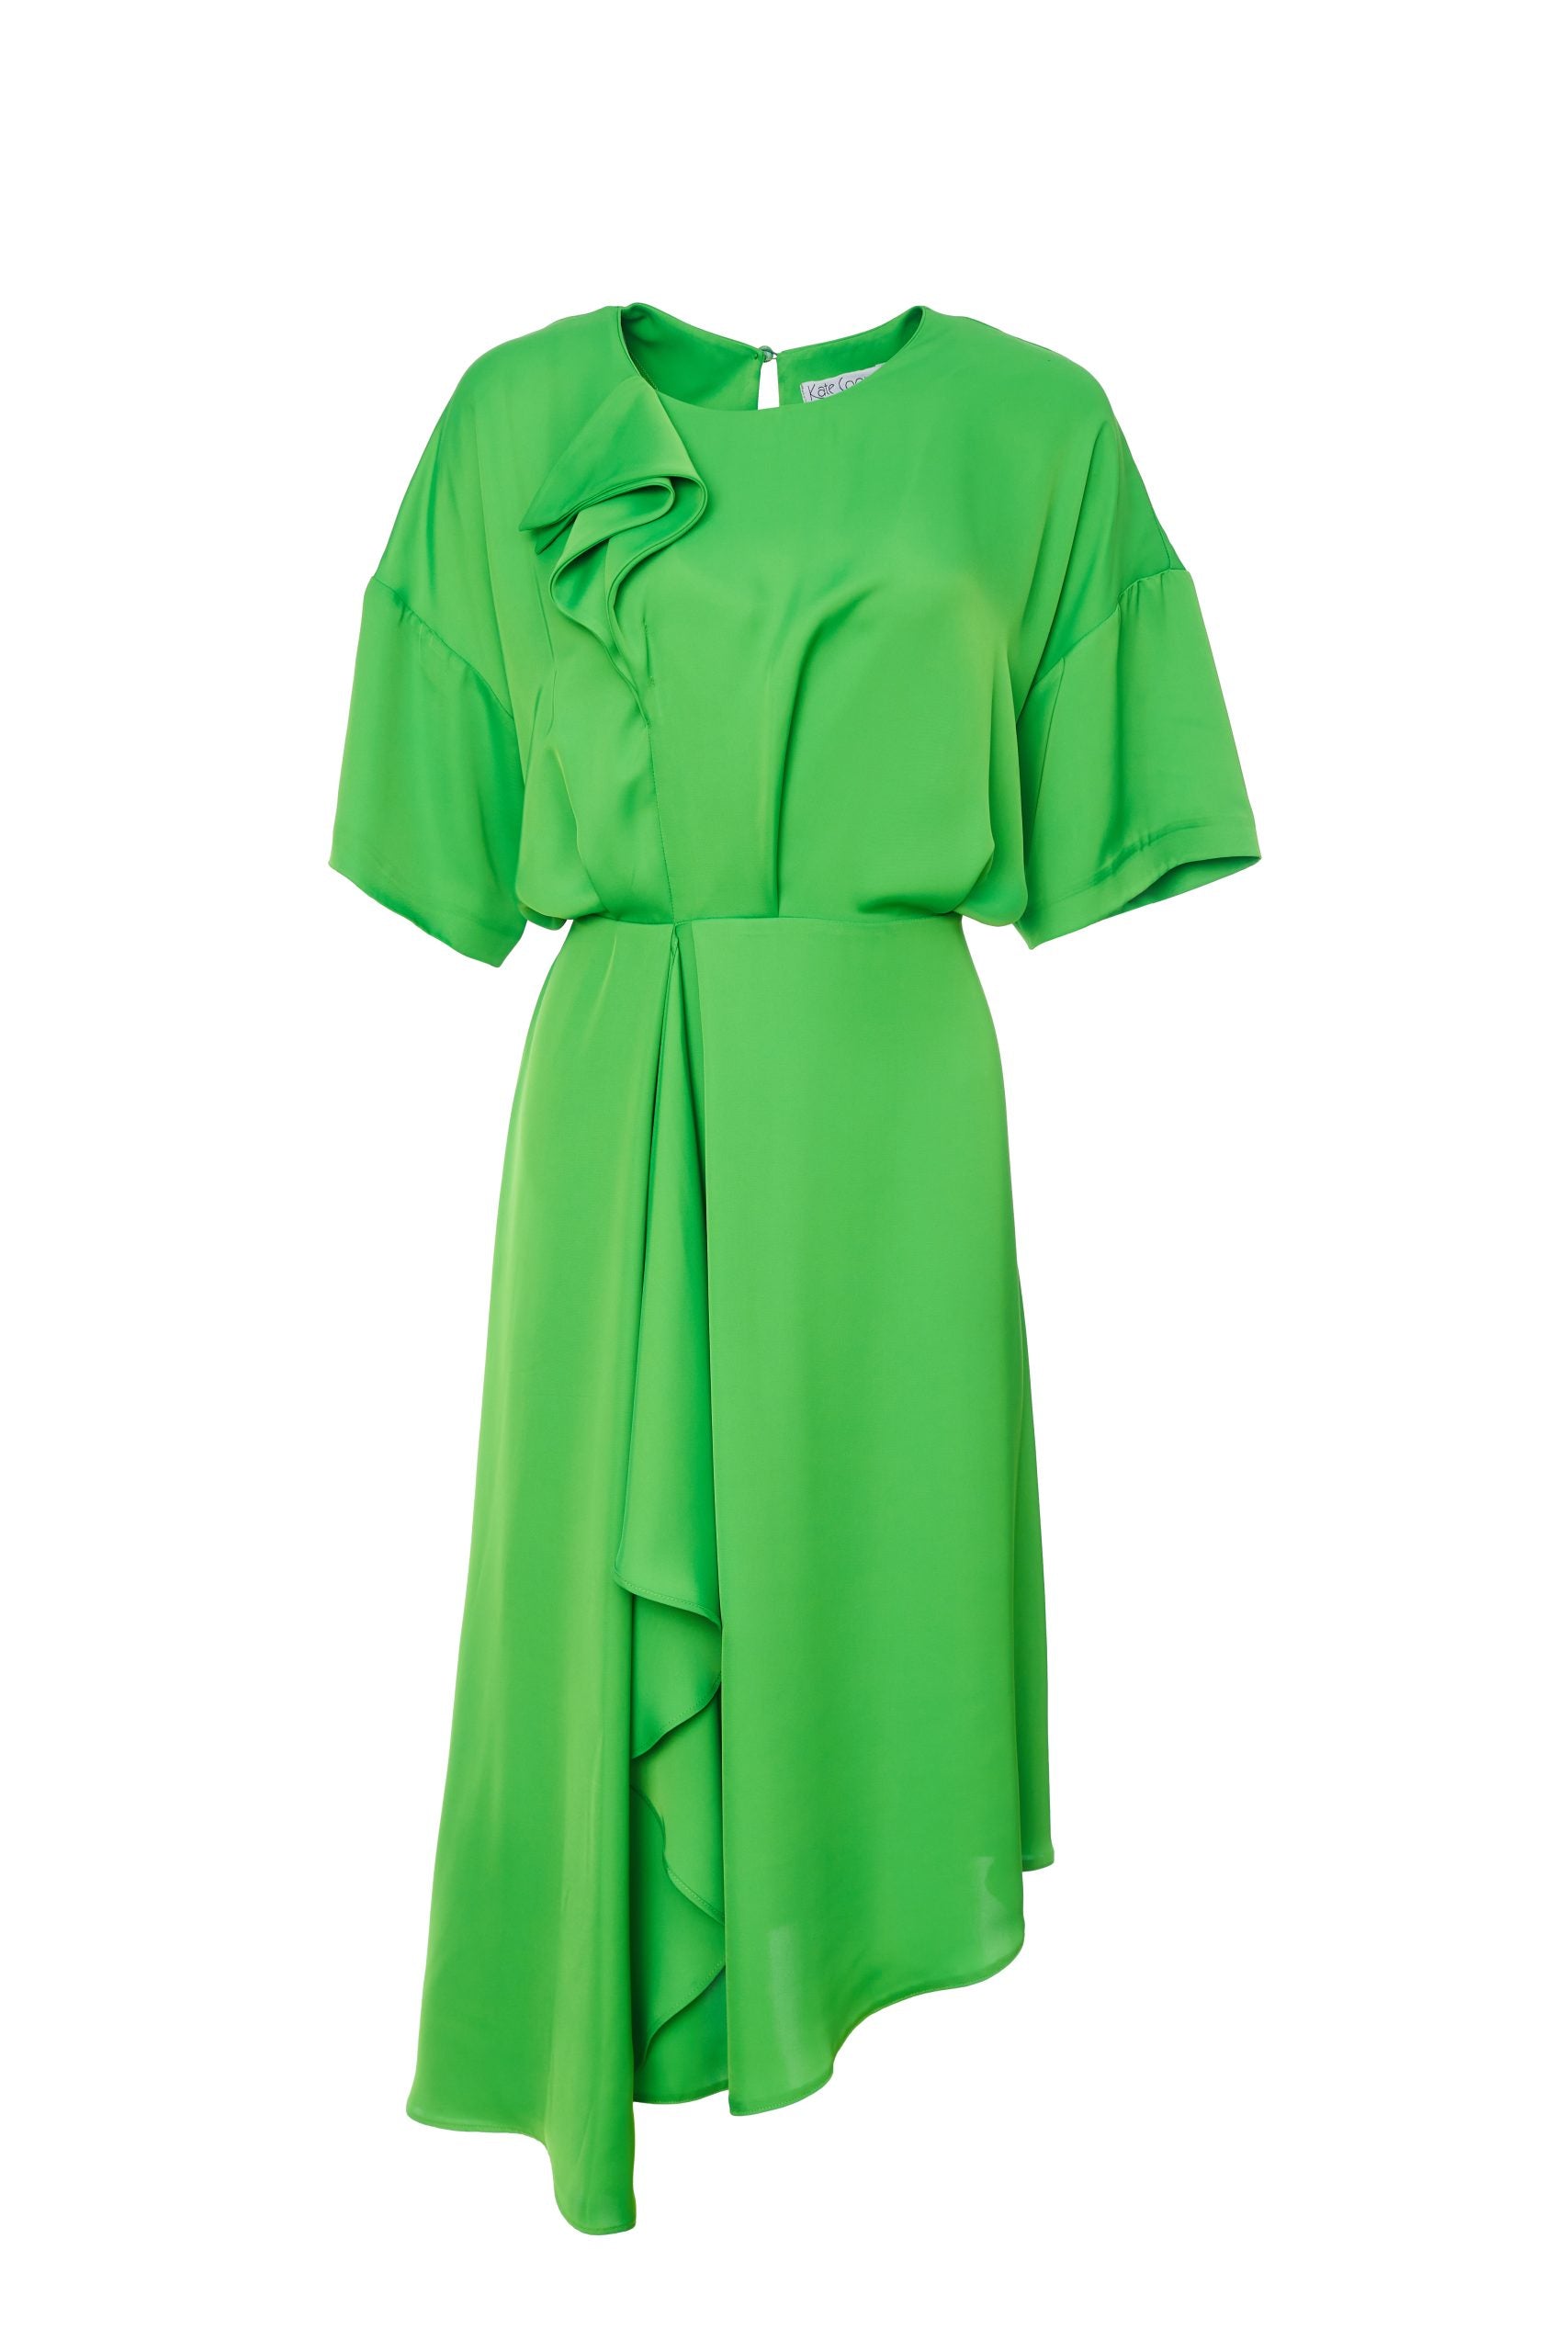 Angle Hem Dress with Frill Detail in Apple Green